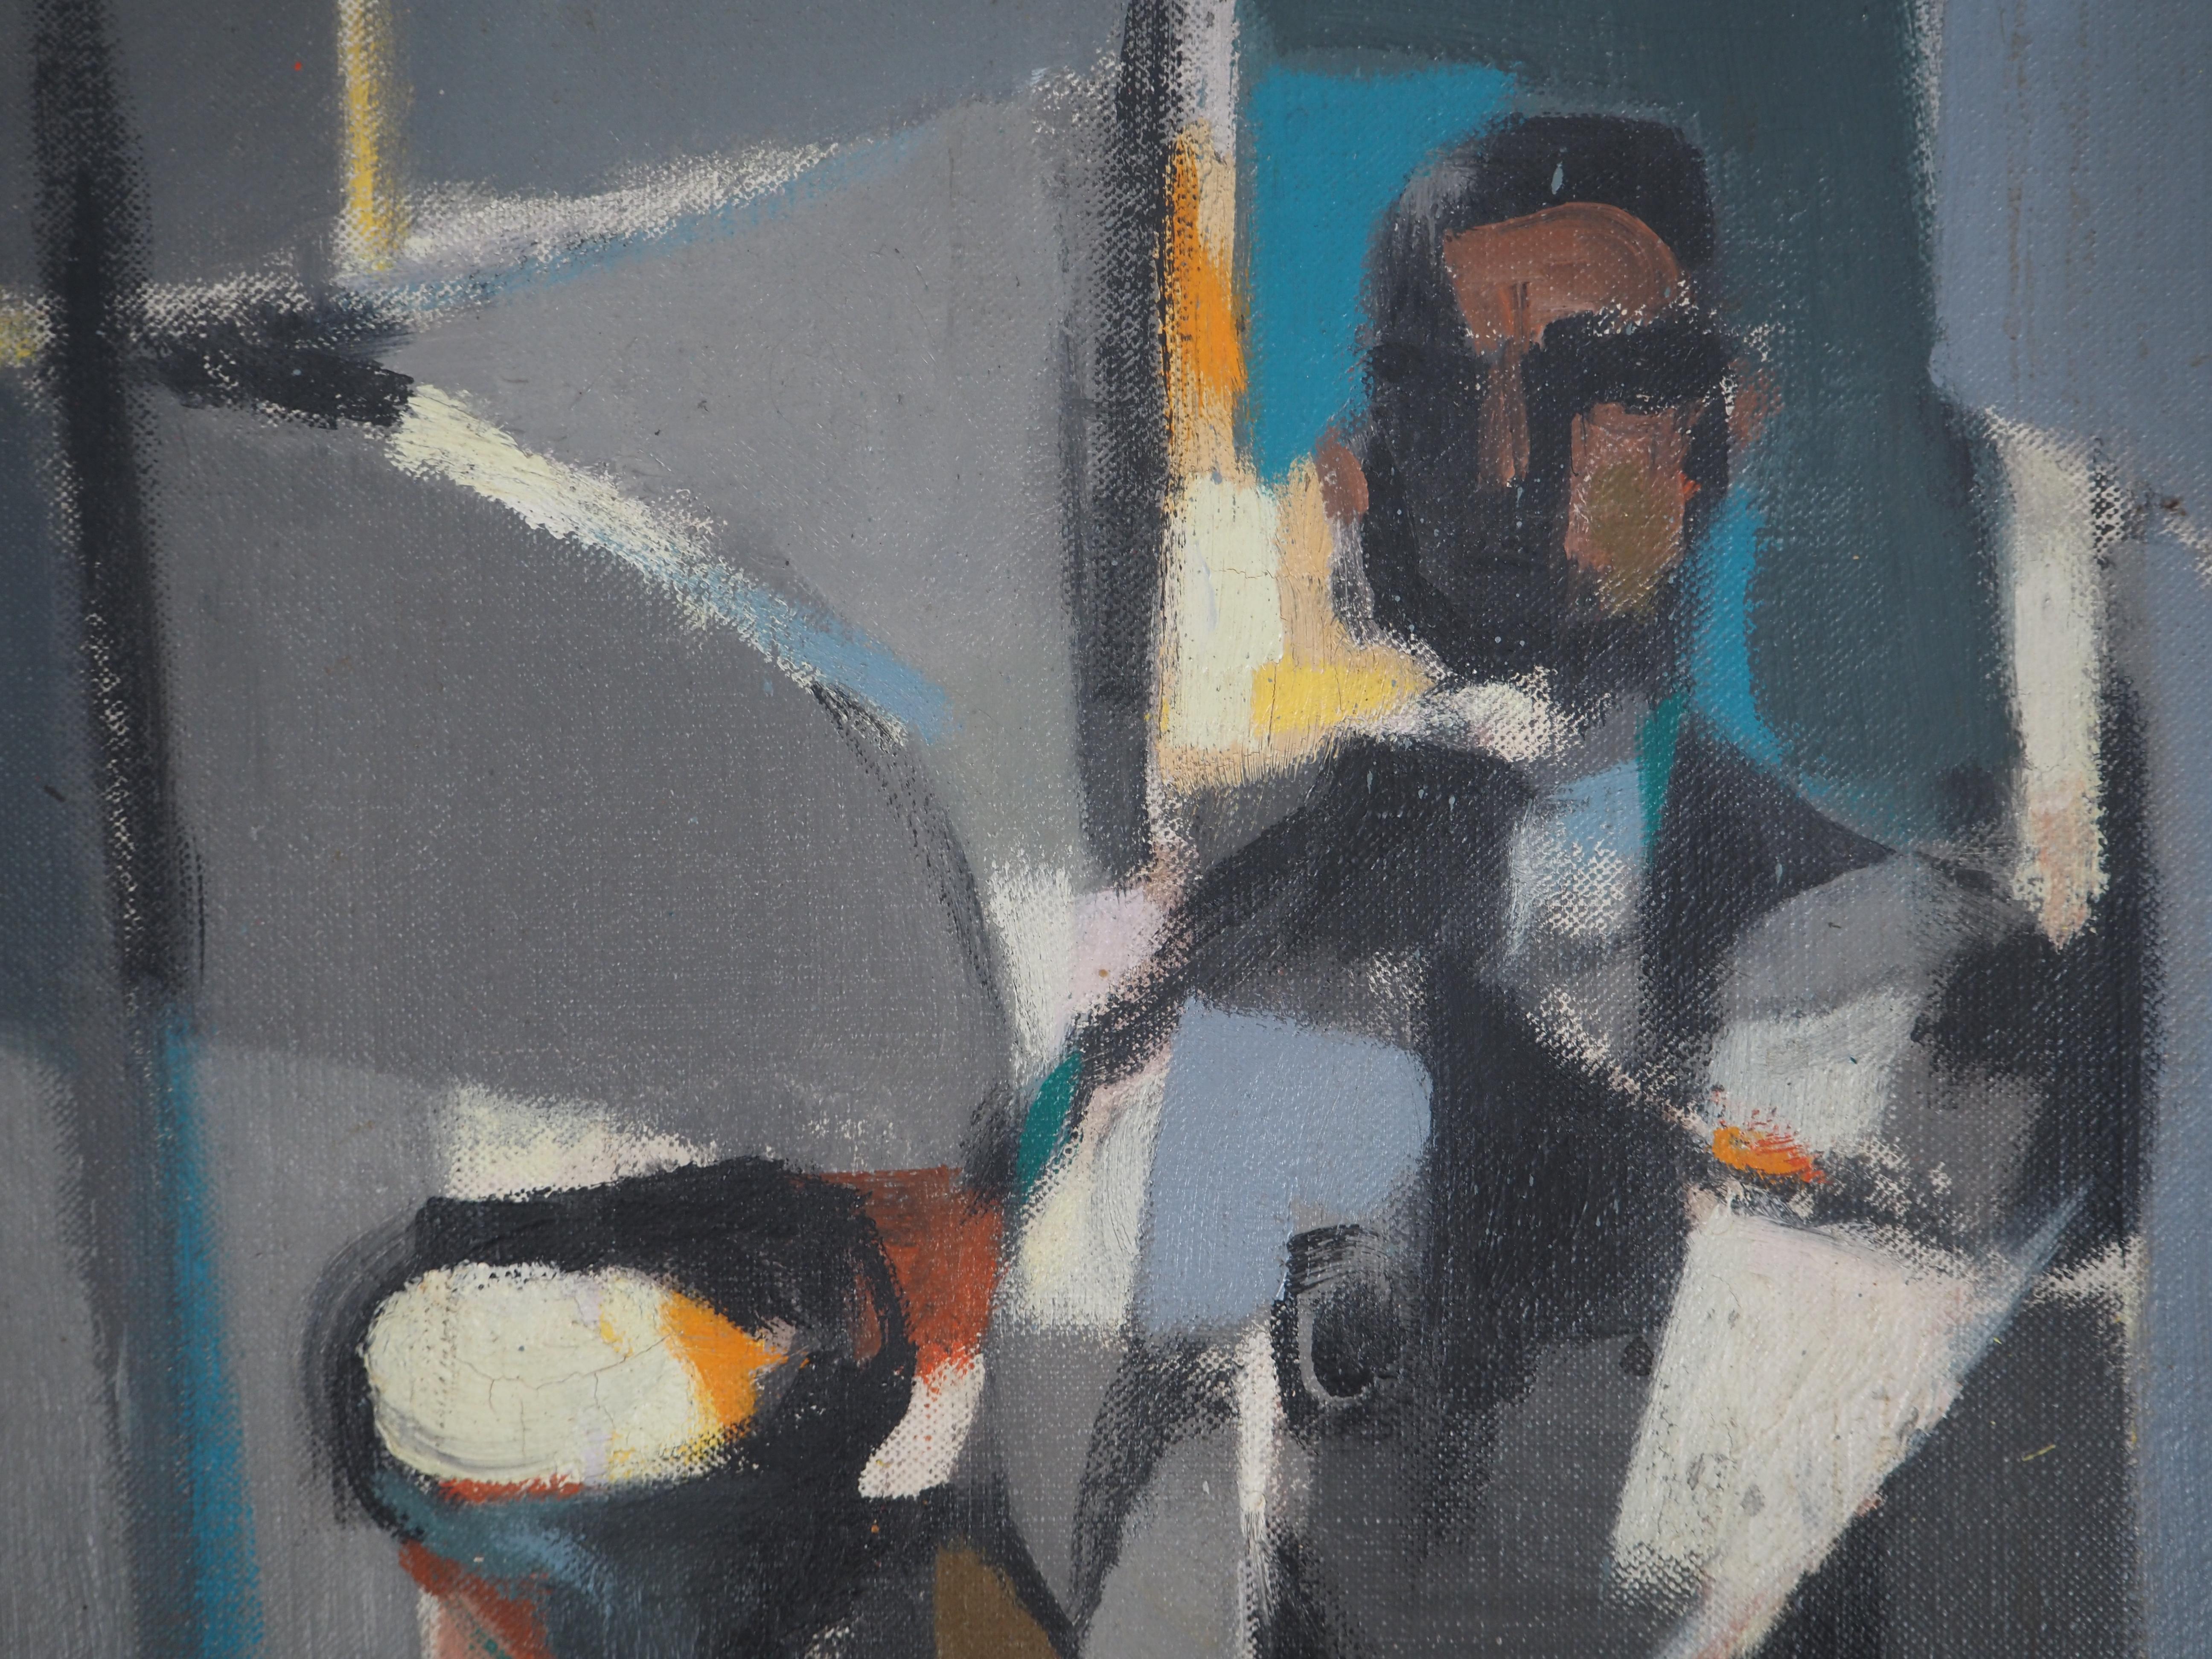 Marcel MOULY
Man Reading a Newspaper on the Cafe Terrace, 1958

Original Oil on canvas
Signed and dated bottom right
Signed, titled dated and situated on the back
On canvas 33 x 24 cm (c. 13 x 10 in)

Excellent condition